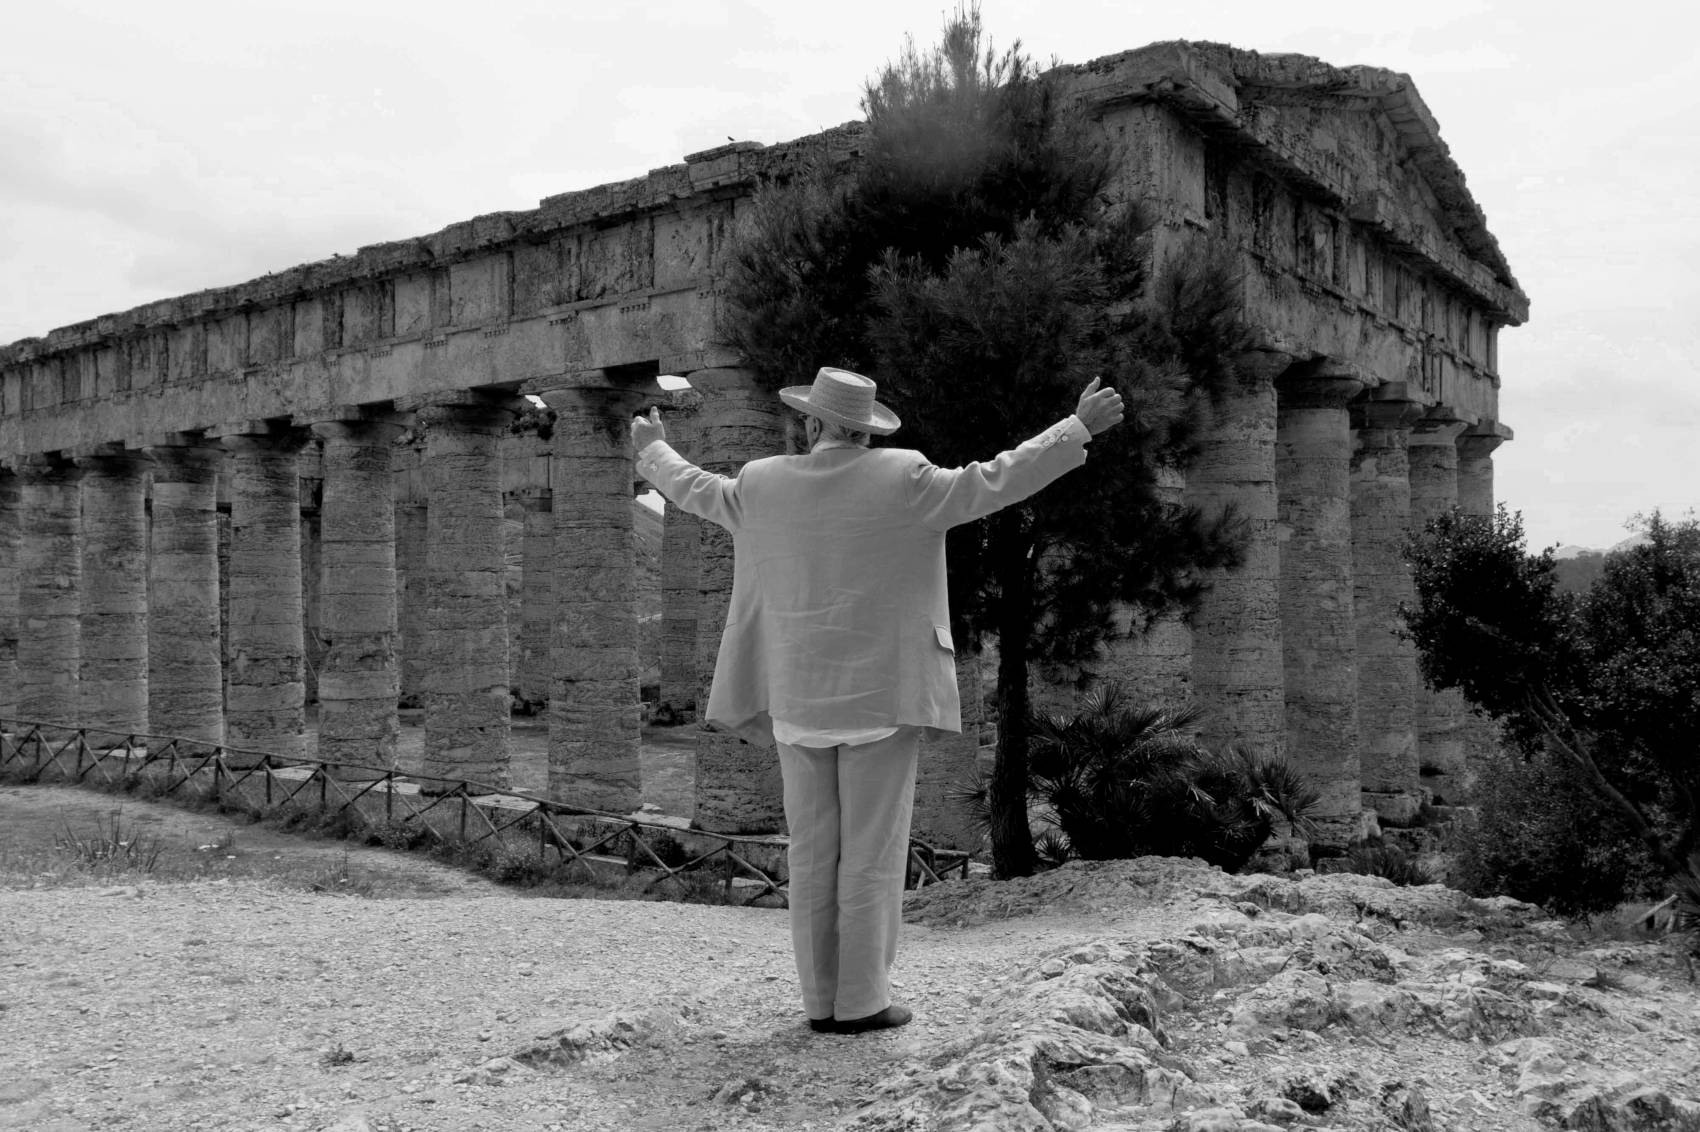 Manolo stood in front of an ancient ruin. He has his back to camera with his arms in the air.